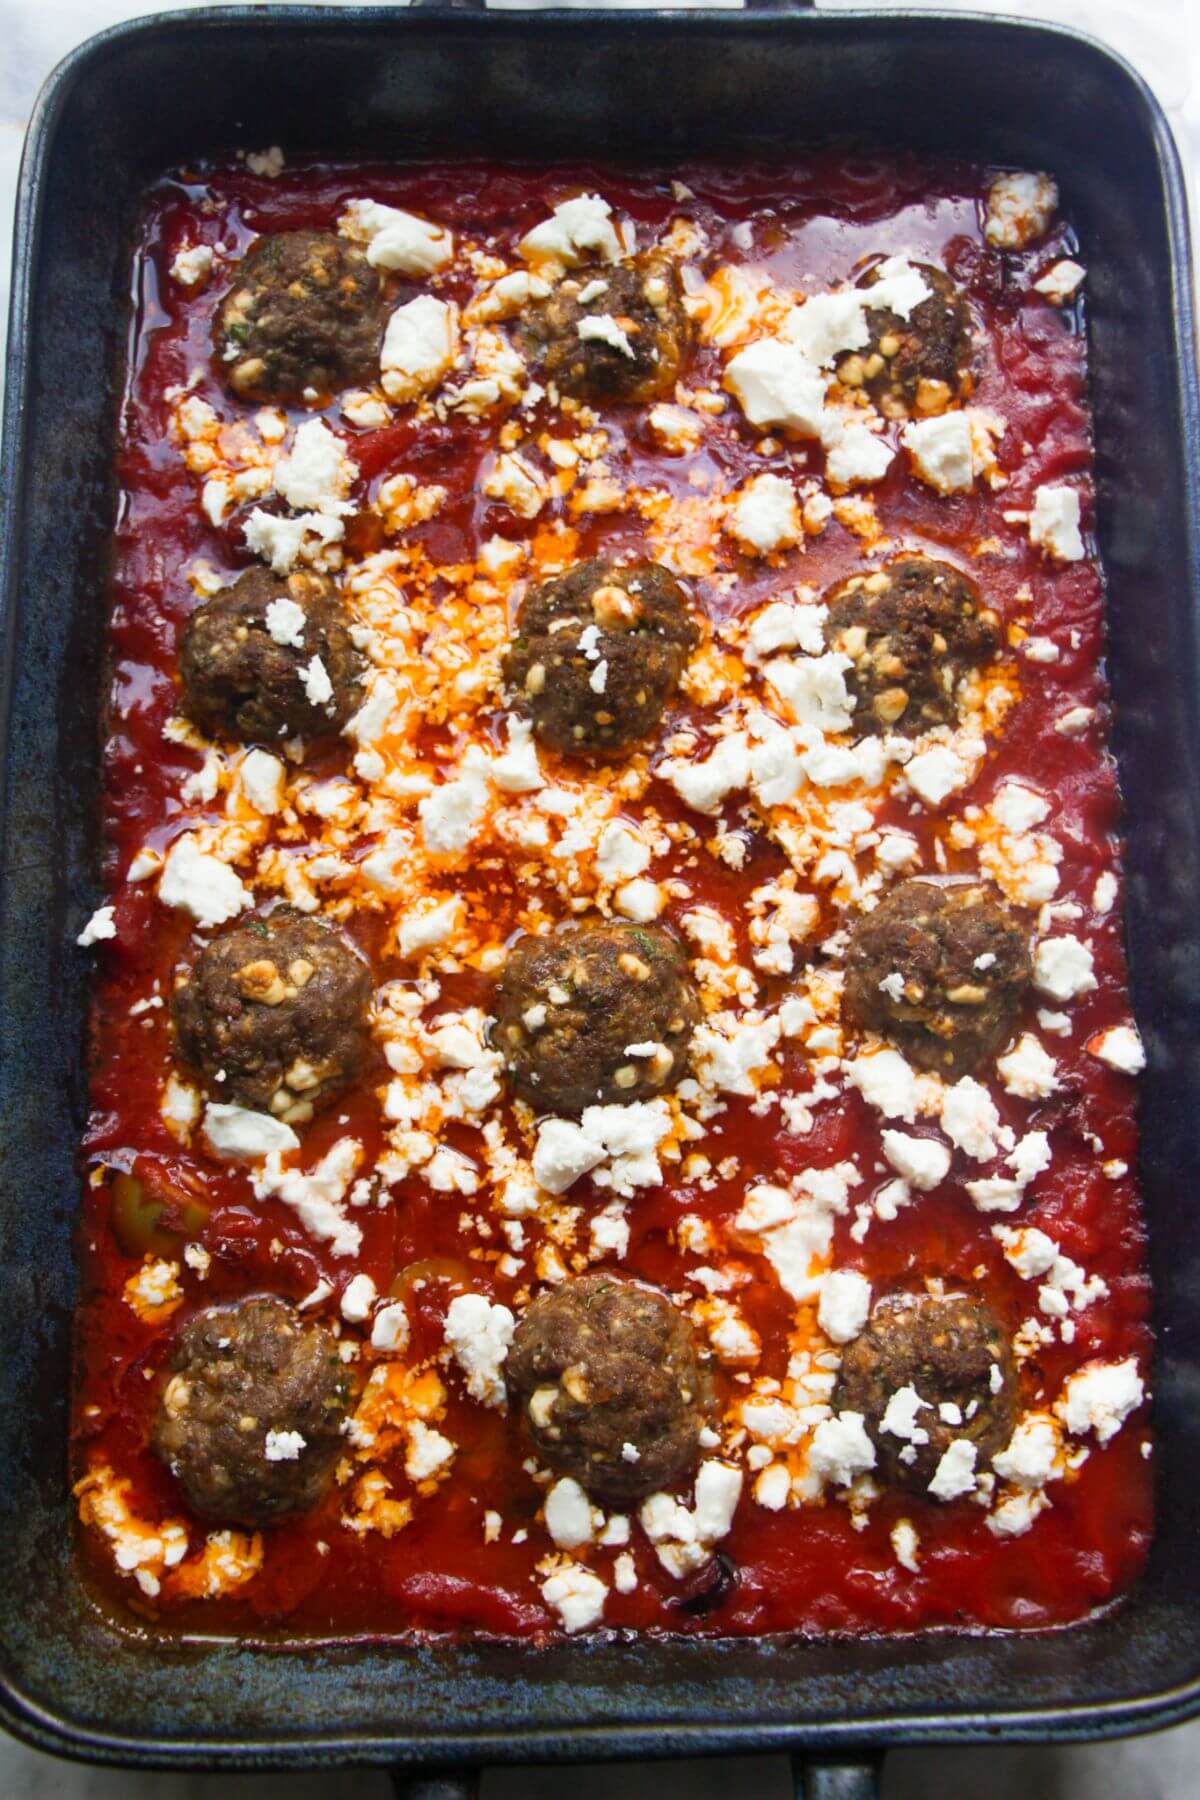 12 meatballs in tomato sauce in a large blue oven dish with feta scattered over the top.